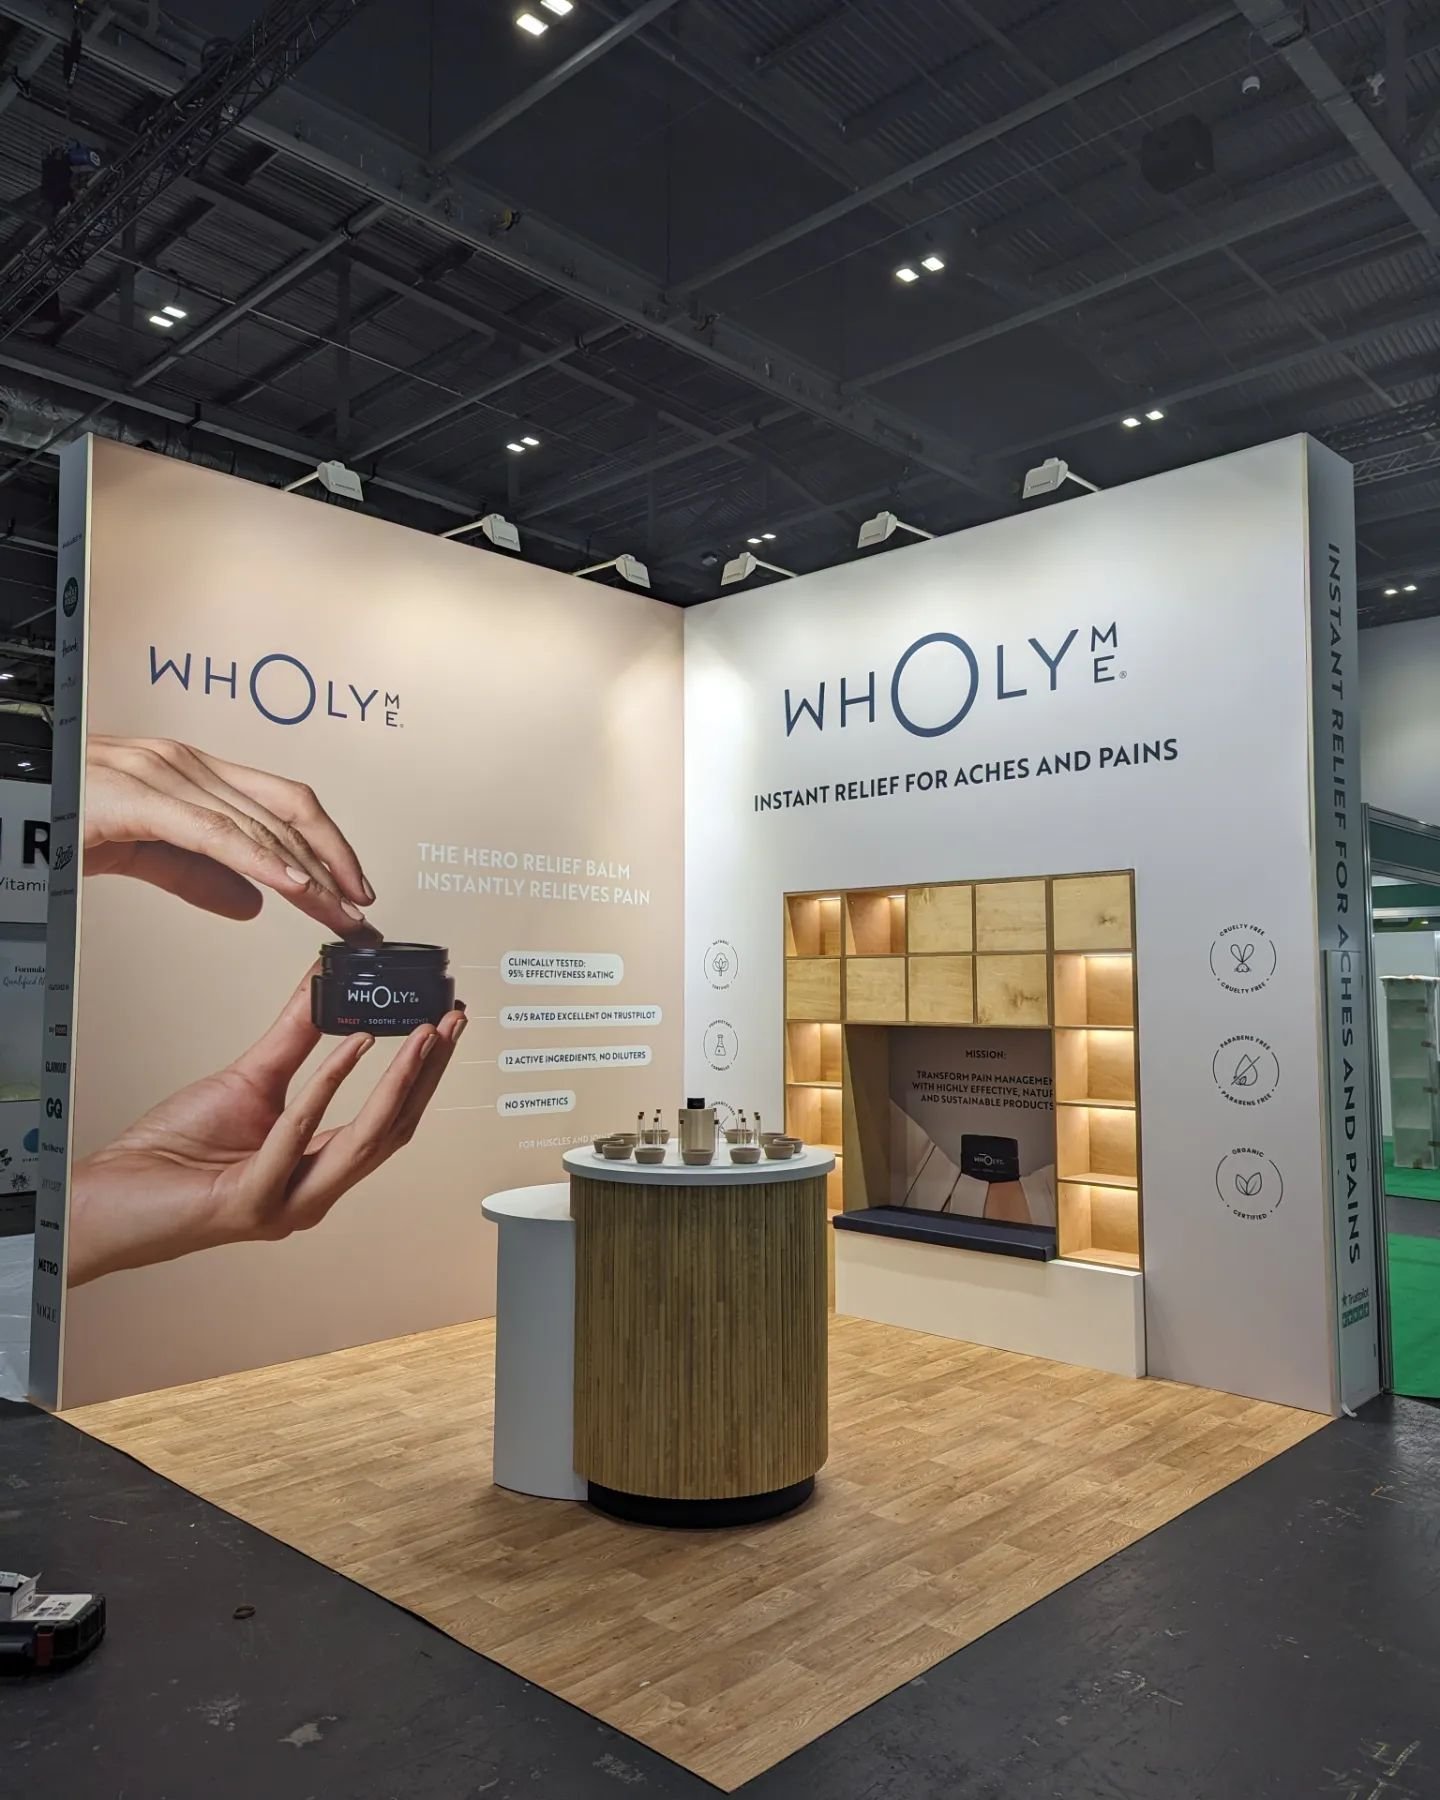 WholyMe at @naturalproductsexpo

In keeping with the philosophy of the show we have used only sustainable materials on this stand. No single-use plastics or laminates but instead canvas, paint and timbers. 

#natural #beauty #warm #sustainable #recyc